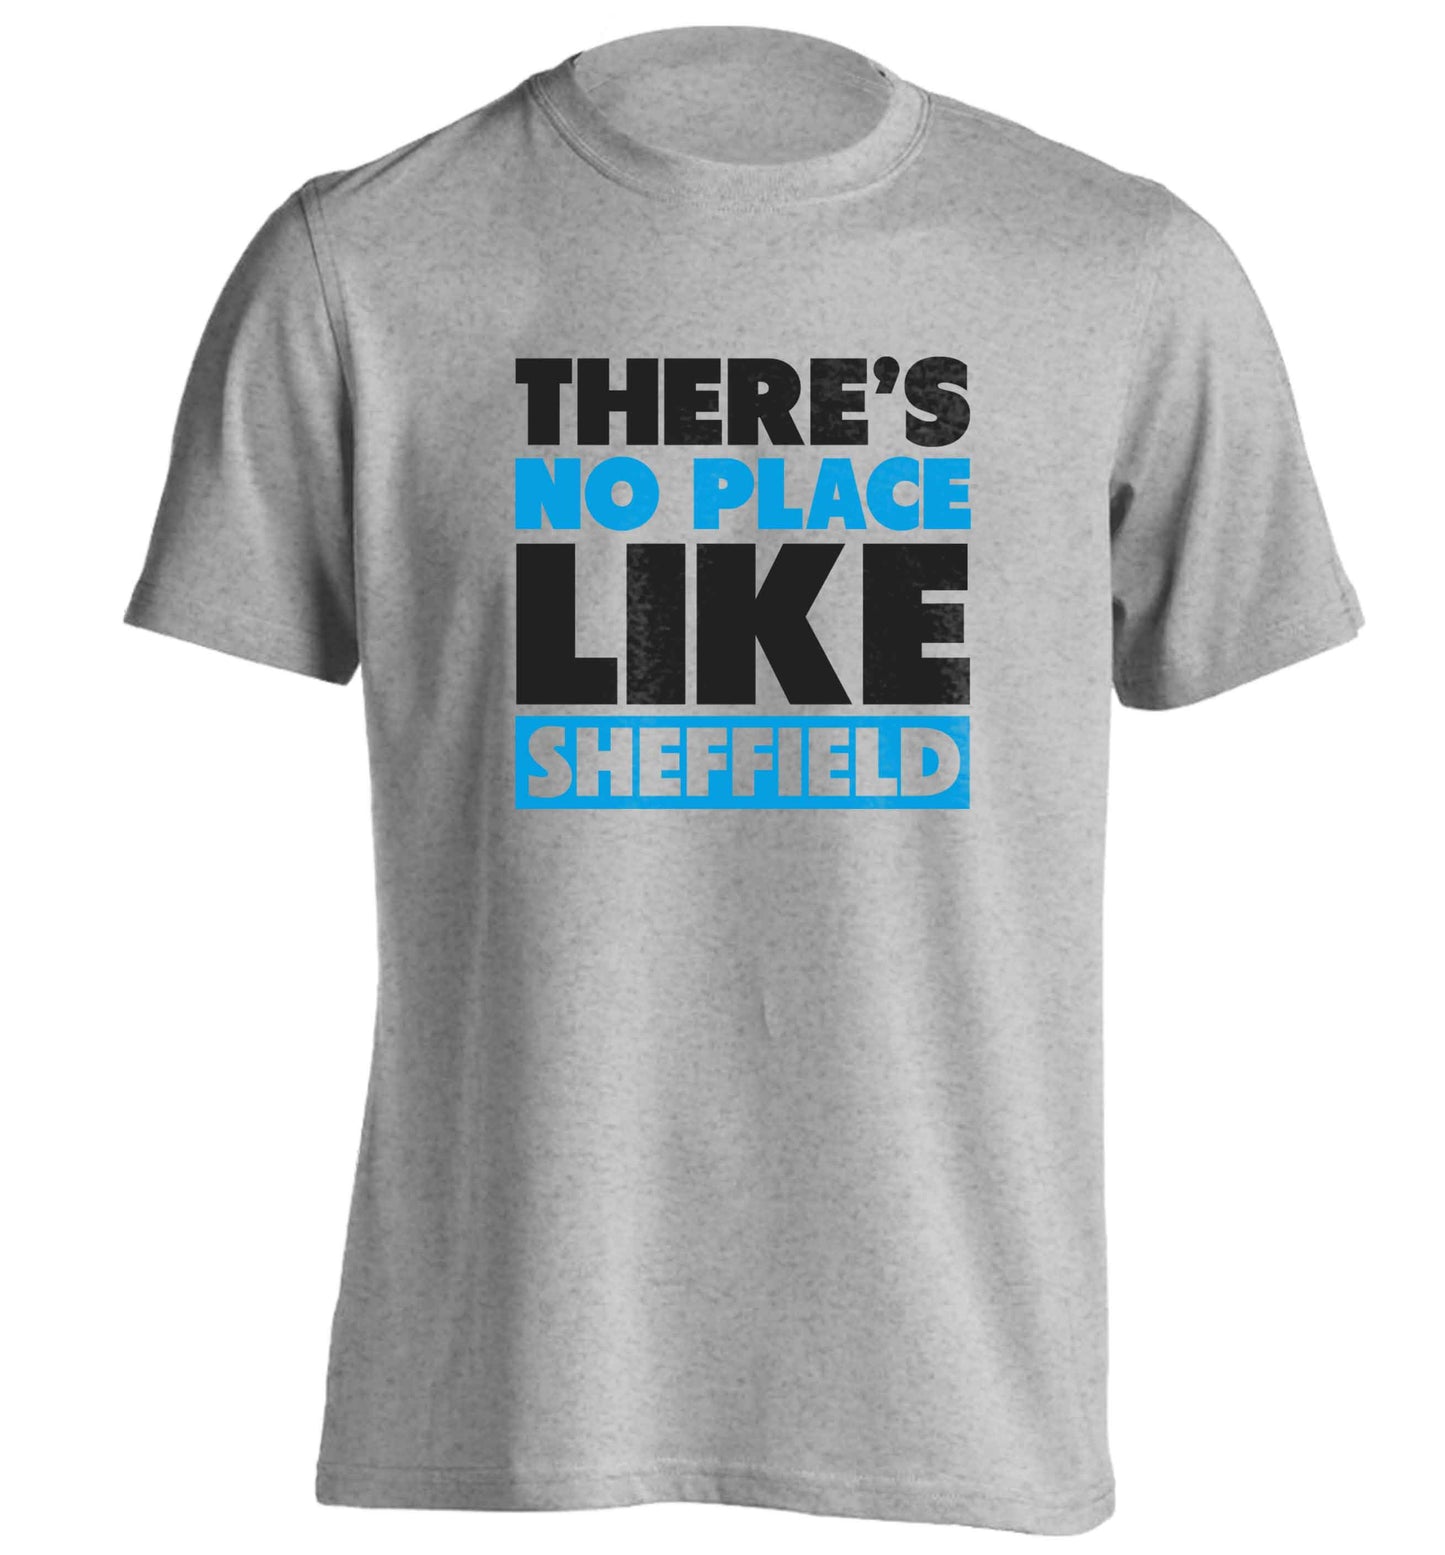 There's no place like Sheffield adults unisex grey Tshirt 2XL